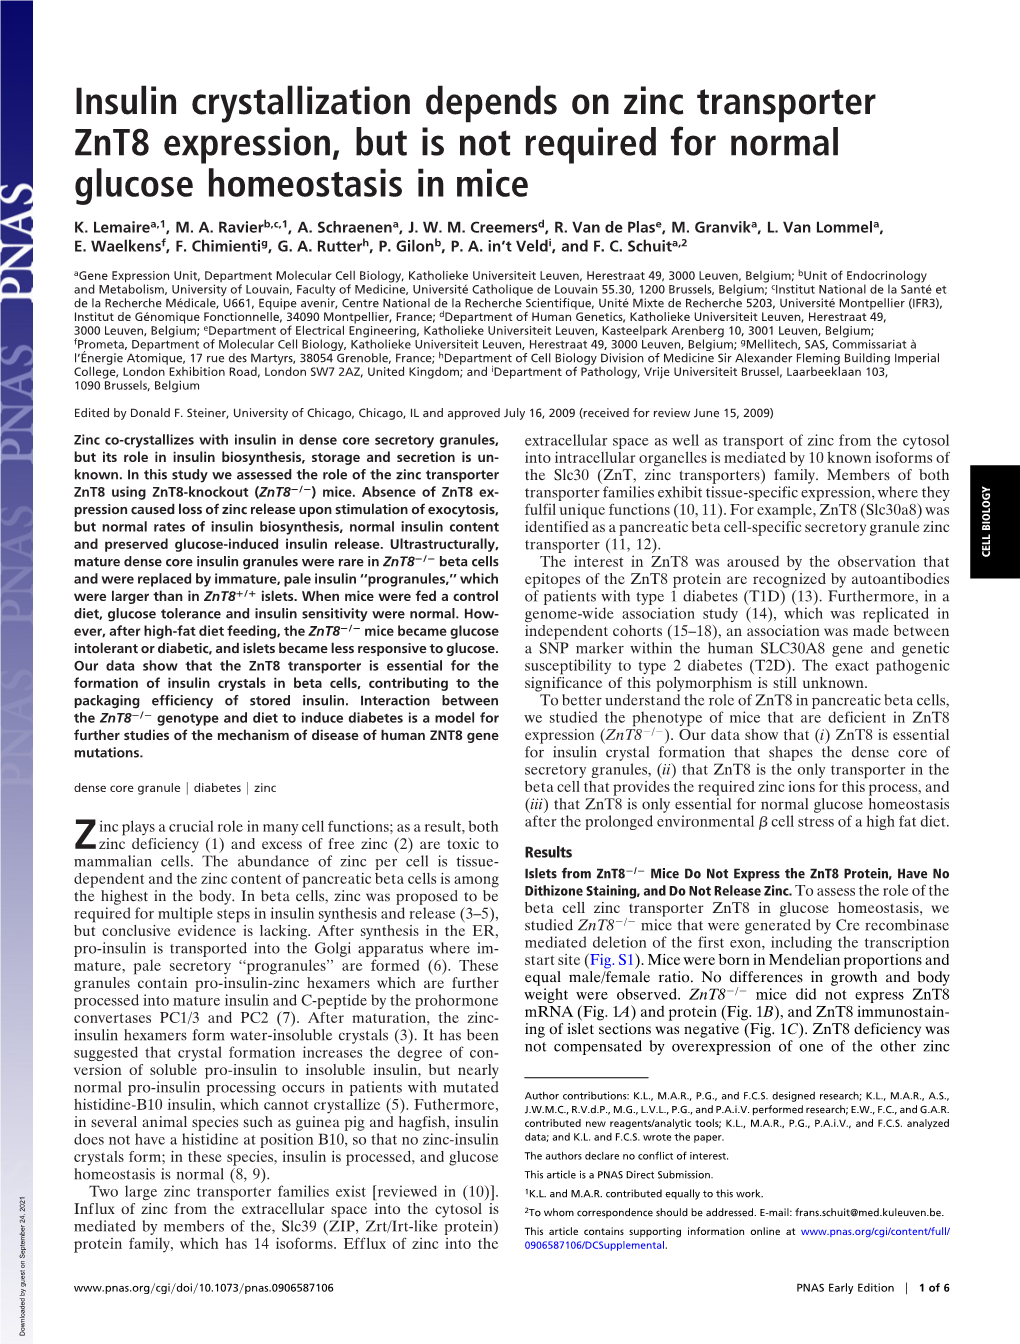 Insulin Crystallization Depends on Zinc Transporter Znt8 Expression, but Is Not Required for Normal Glucose Homeostasis in Mice